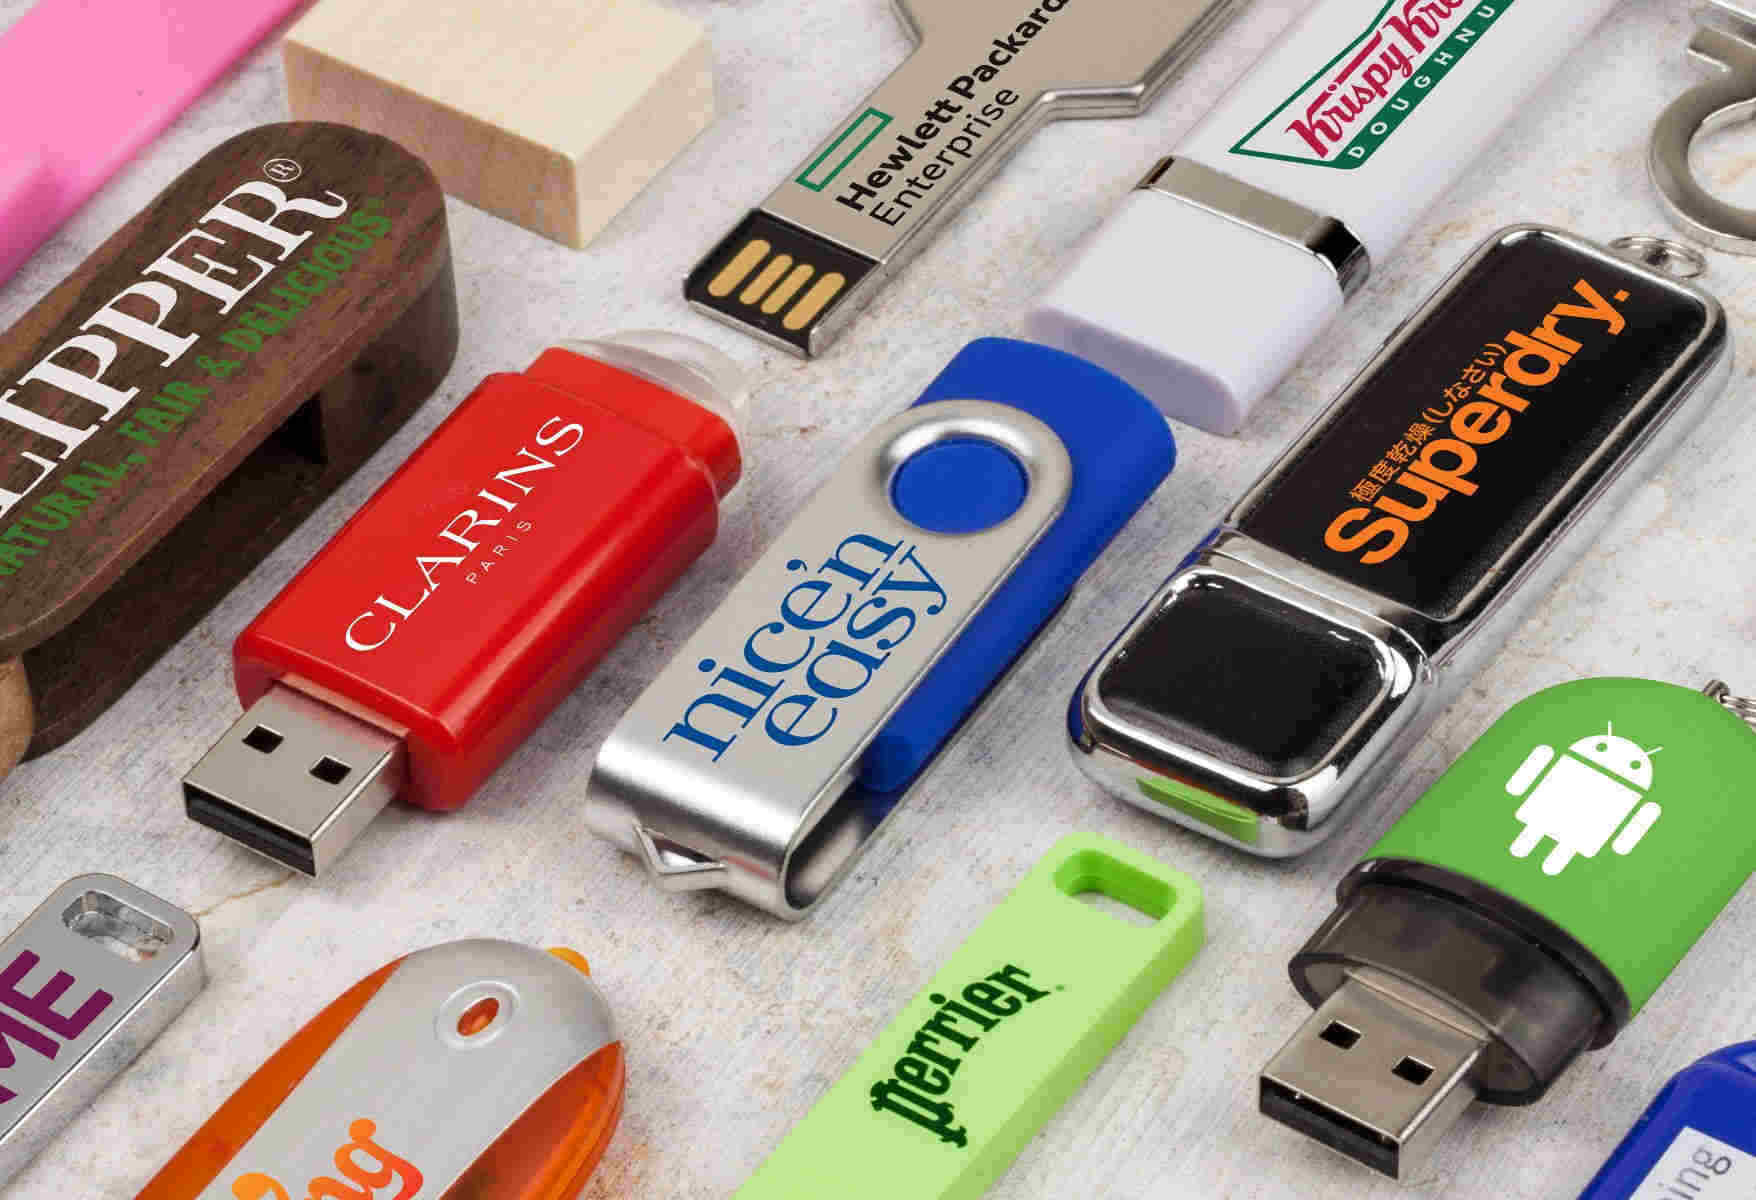 a selection of branded usb sticks from USB2U